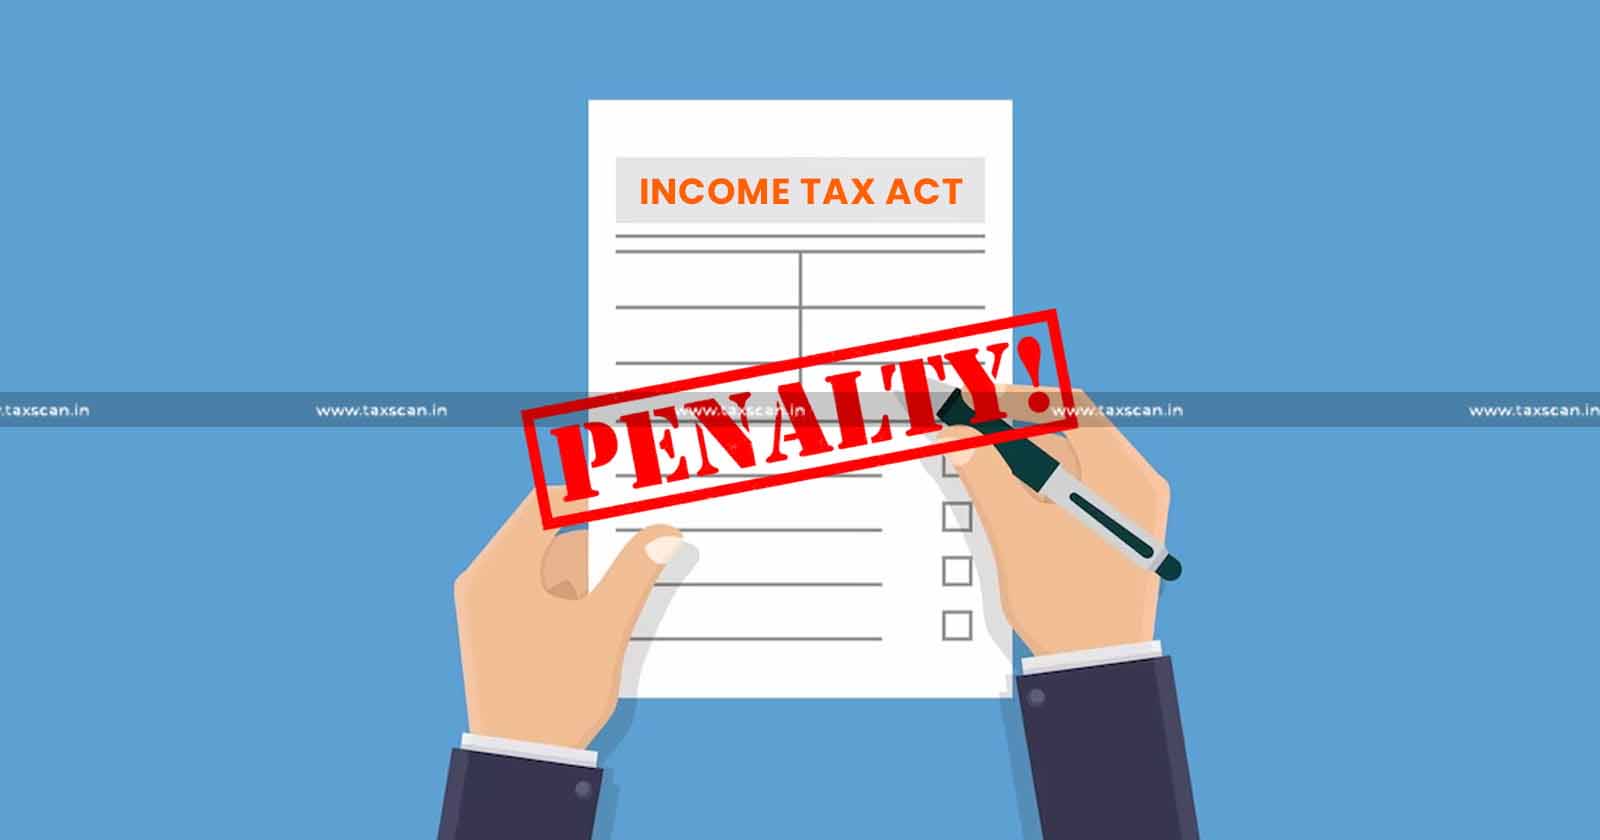 penalty - levy - section 271(1)(c ) of Income Tax Act - upheld - itat - taxscan